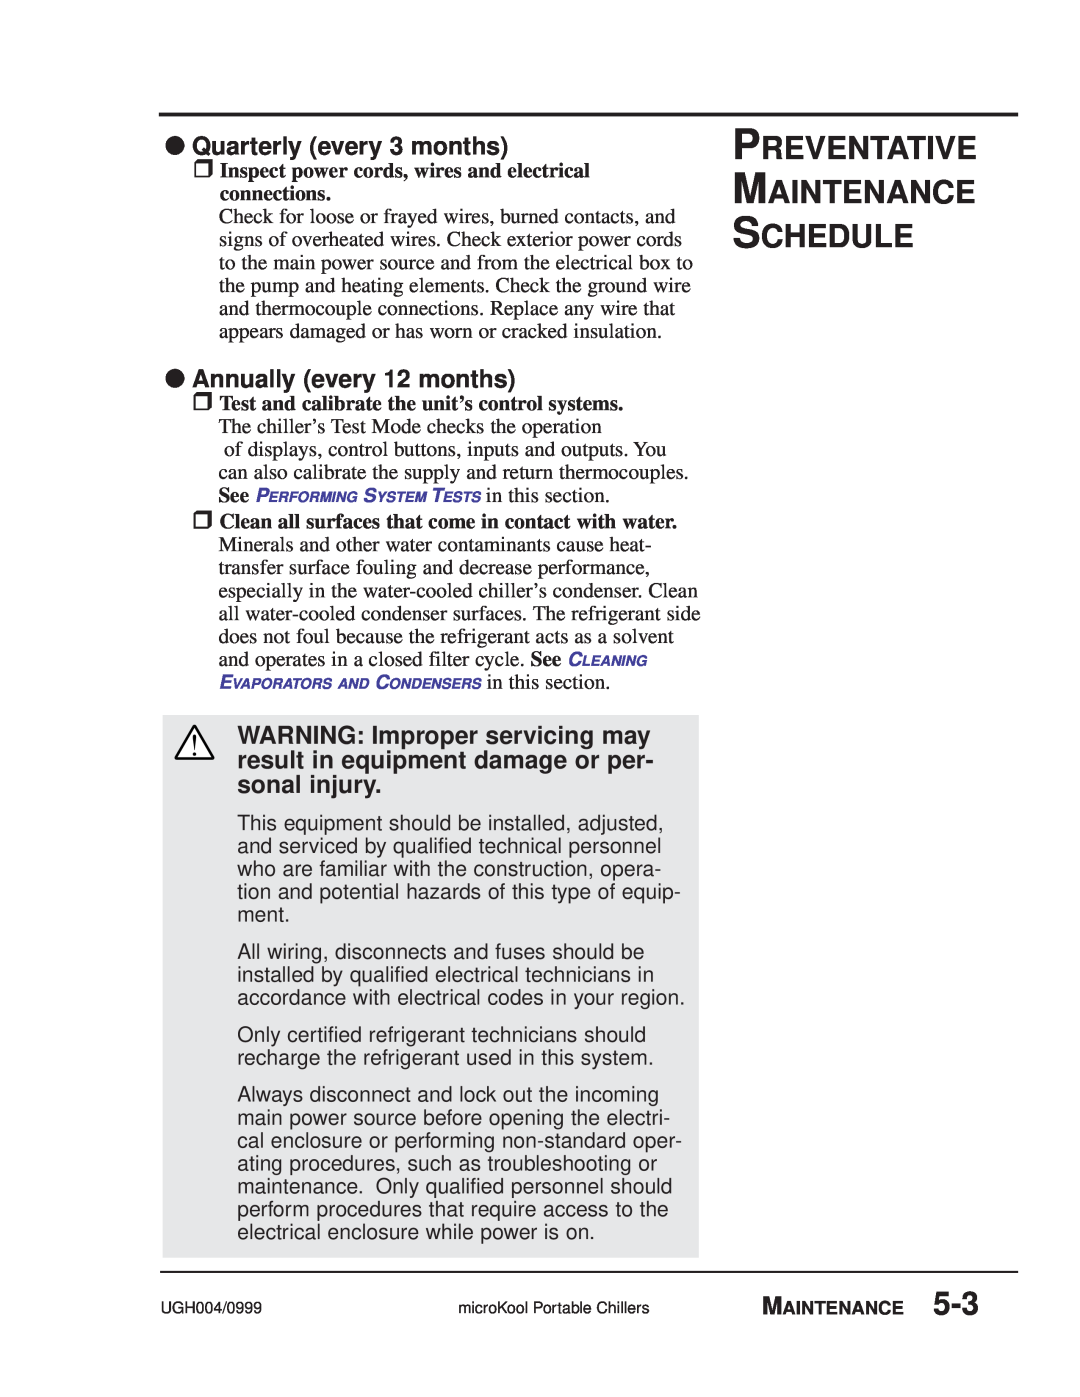 Conair MPW, MPA manual Quarterly every 3 months, Annually every 12 months, Preventative Maintenance Schedule 